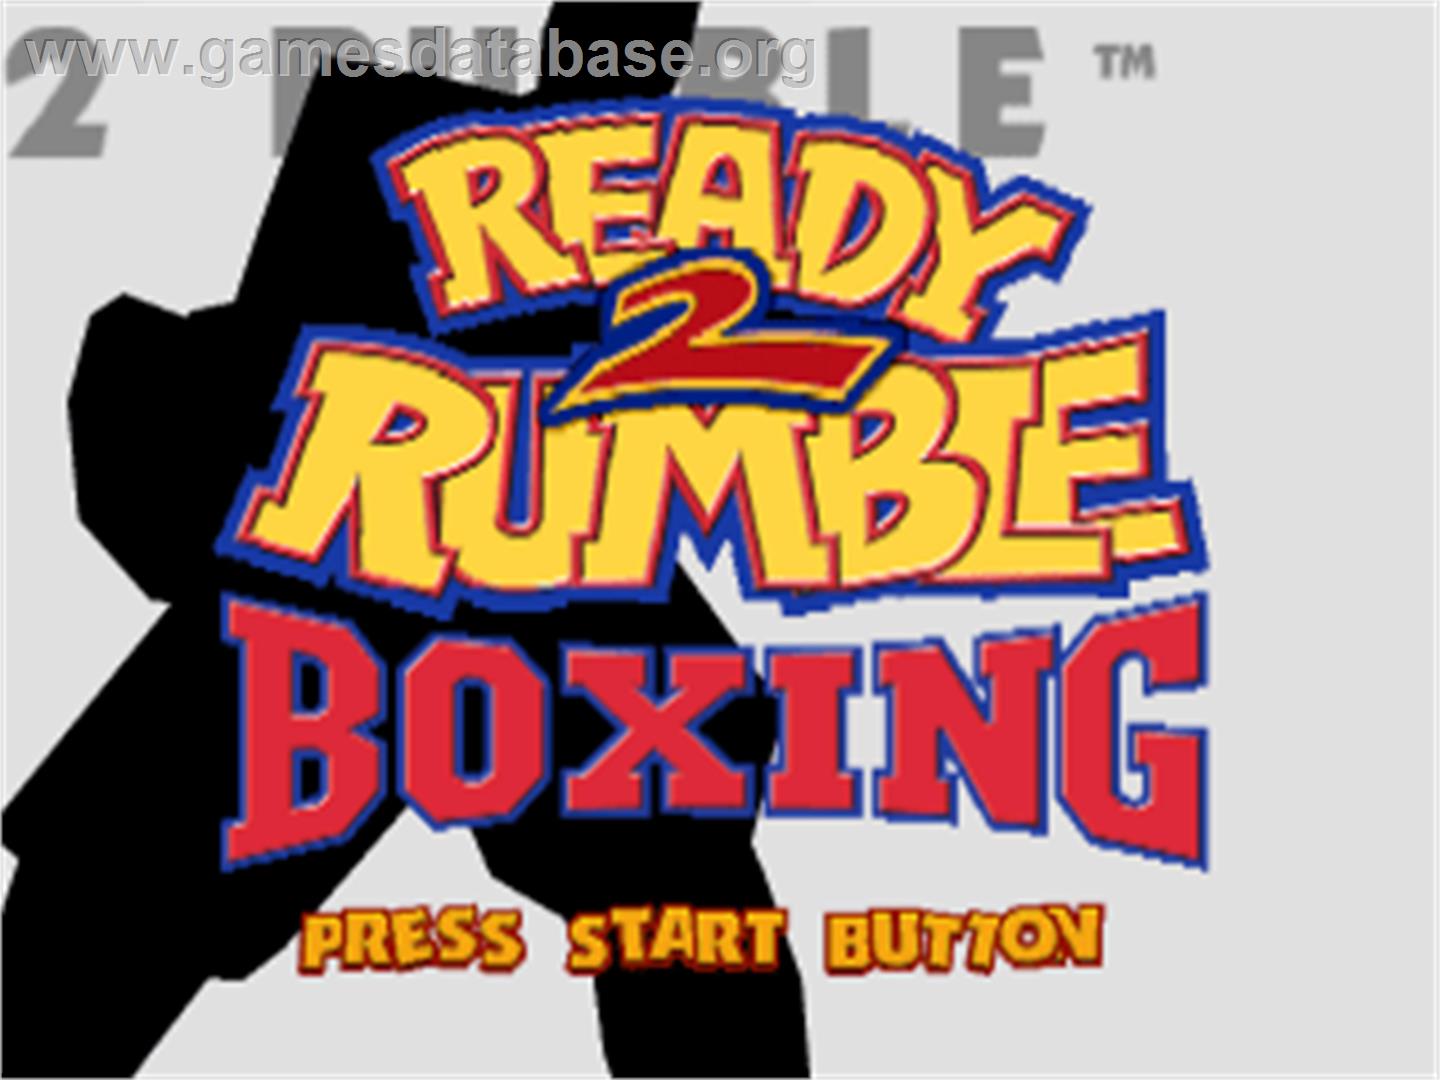 Ready 2 Rumble Boxing: Round 2 - Sony Playstation - Artwork - Title Screen